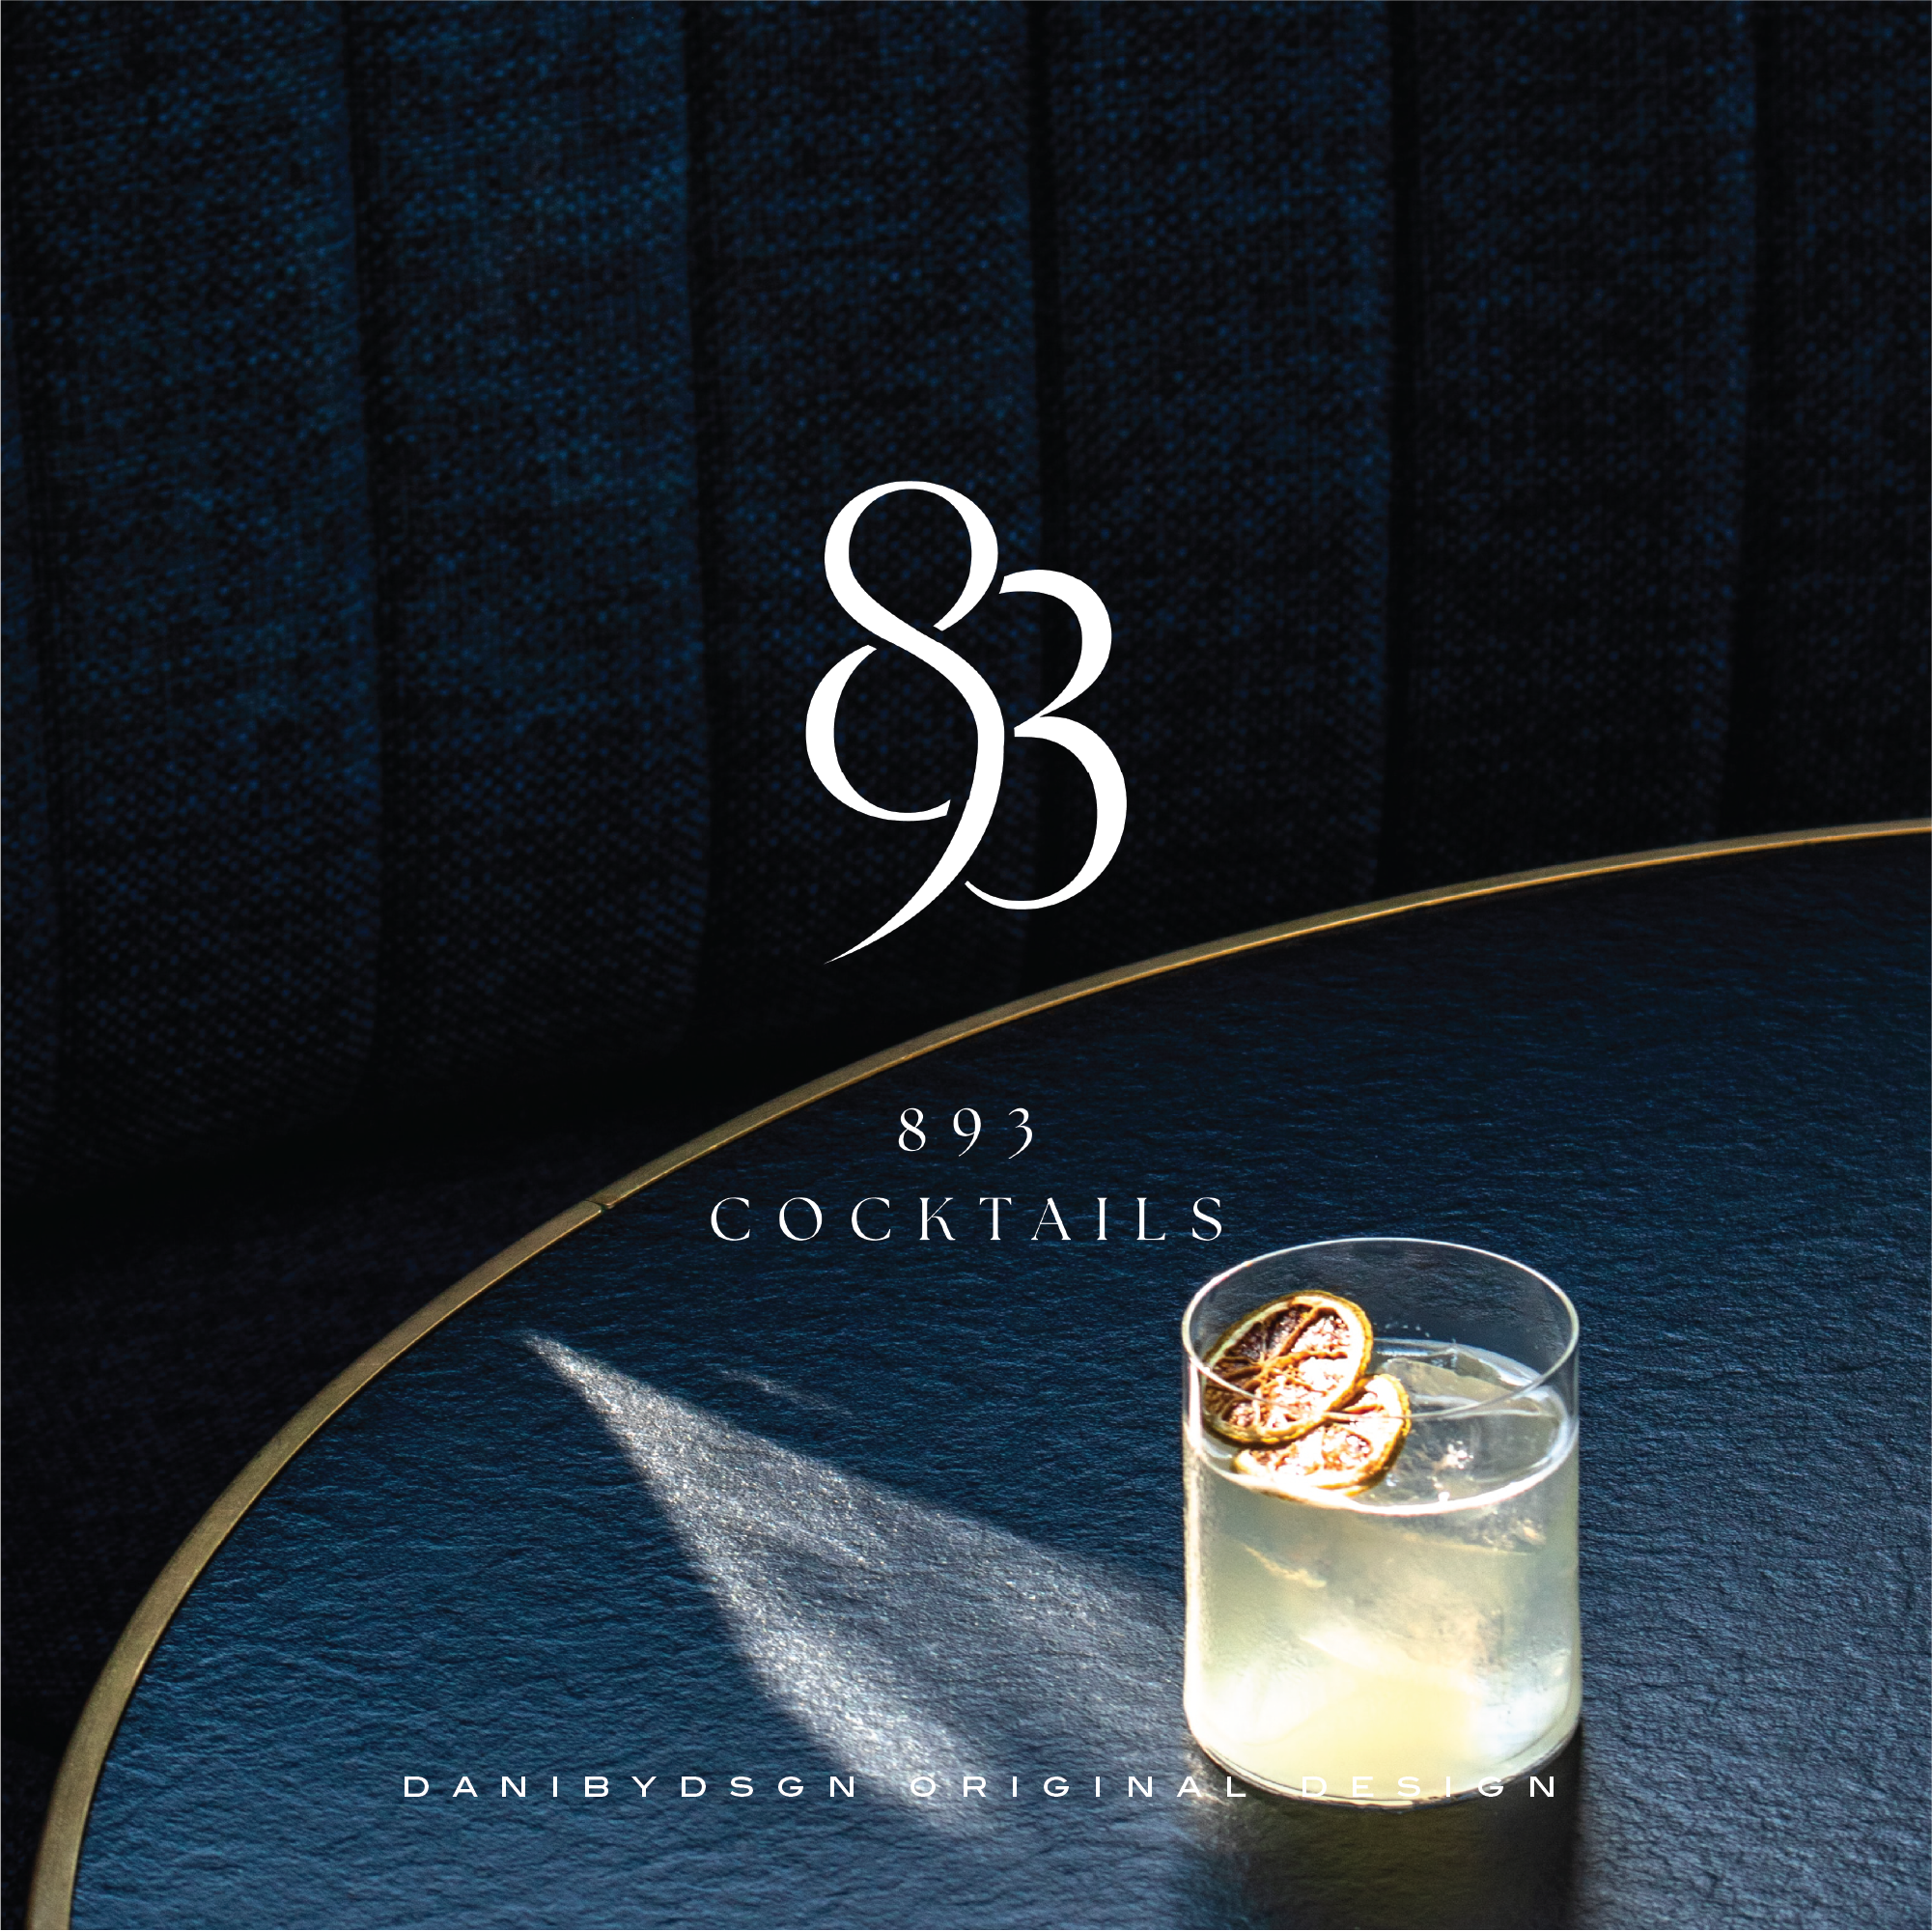 Initial monogram logo design for 893 Cocktails.  The 893 is overlapped to create a destinct and striking business logo design.  Elegant and luxury branding.  Pic is of the branding logo  and a close up of a cocktail in a short glass on a black textured table in a dark room setting. Check out our business initial monogram and branding kits.